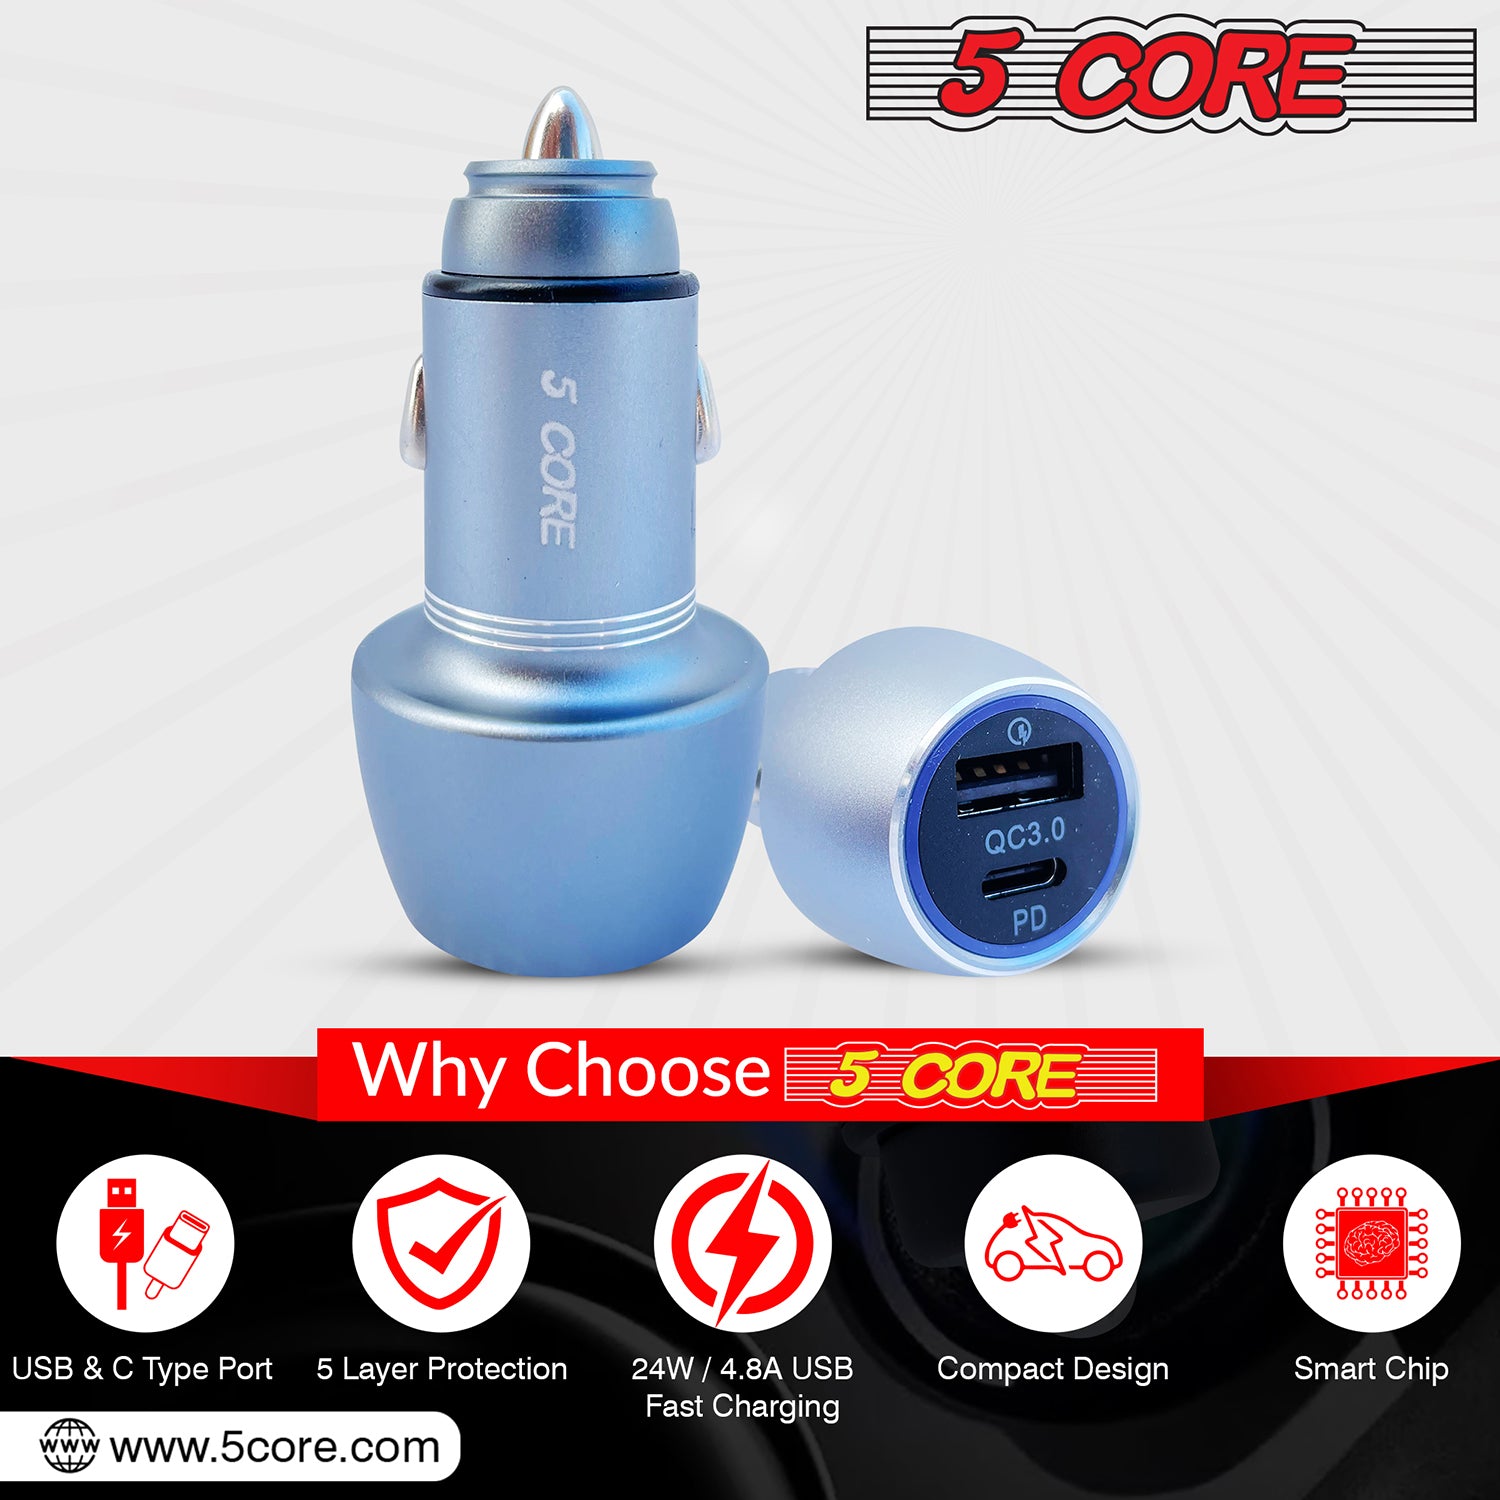 5Core USB Car Charger Cigarette Lighter Adapter 1 USB 1 Type C Port QC 3.0 36W Fast Charging